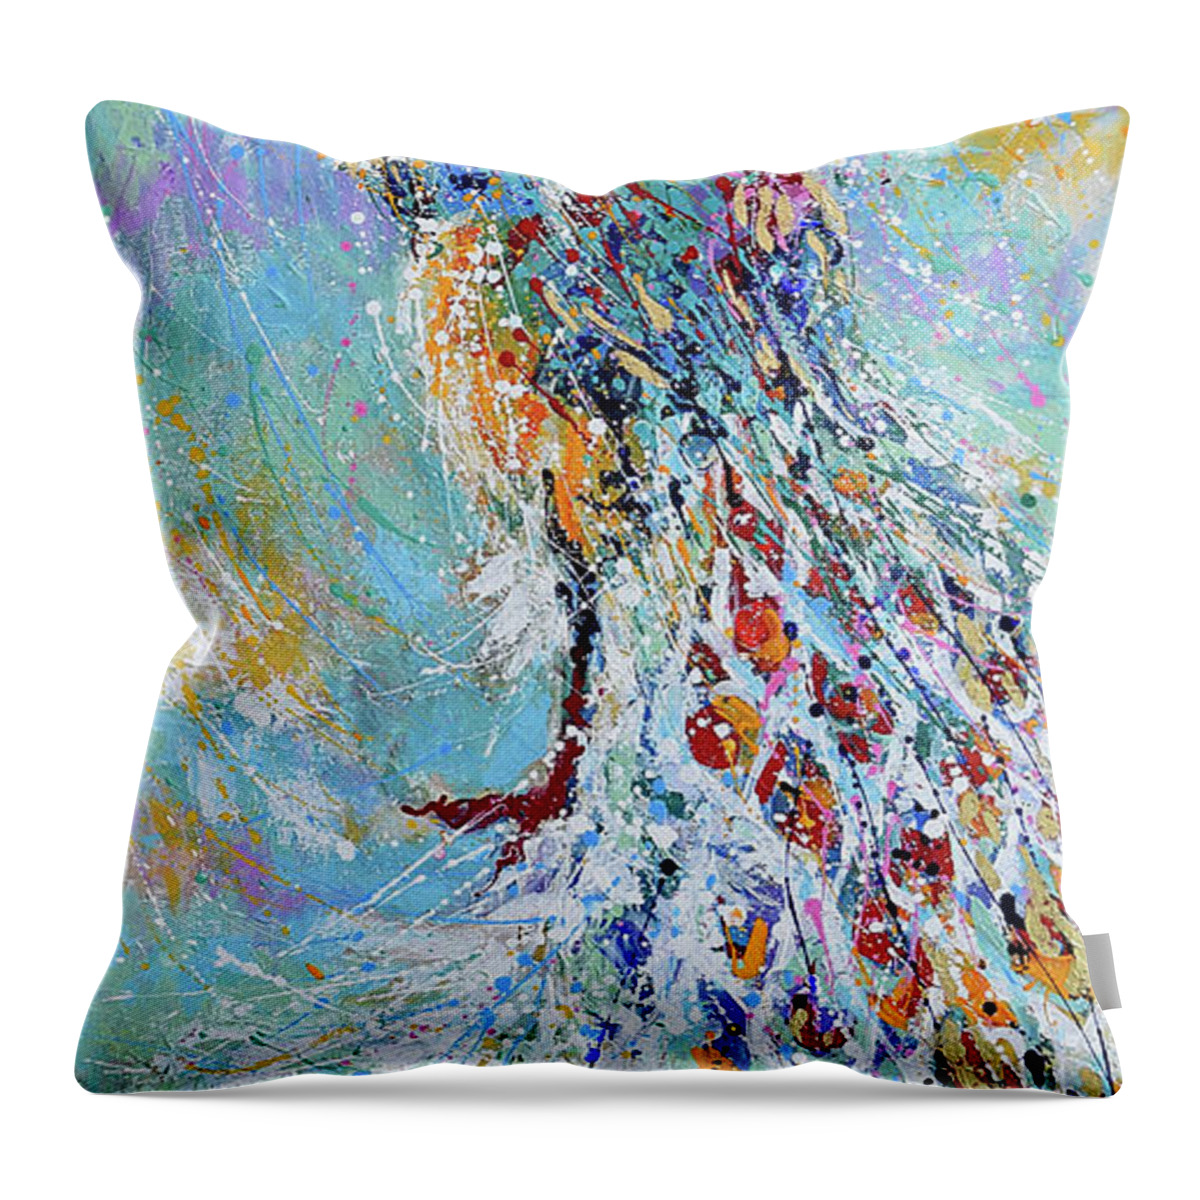 Peacock Throw Pillow featuring the painting Poised Glory by Jyotika Shroff